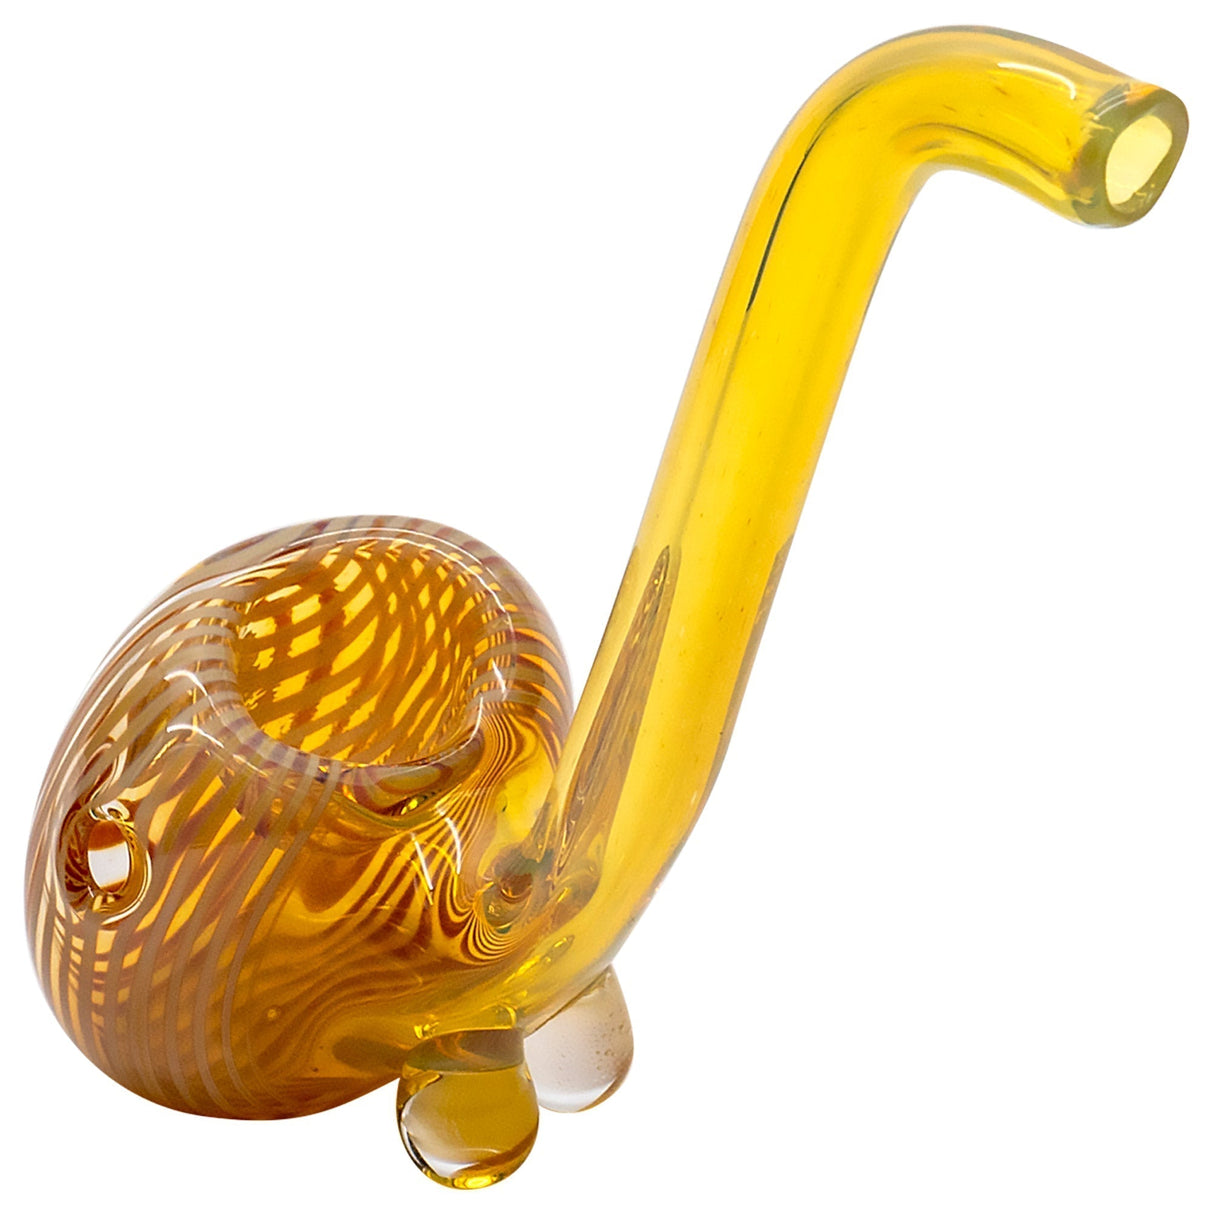 LA Pipes Spoon Hand Pipe in Amber, Borosilicate Glass with Swirl Design - Side View